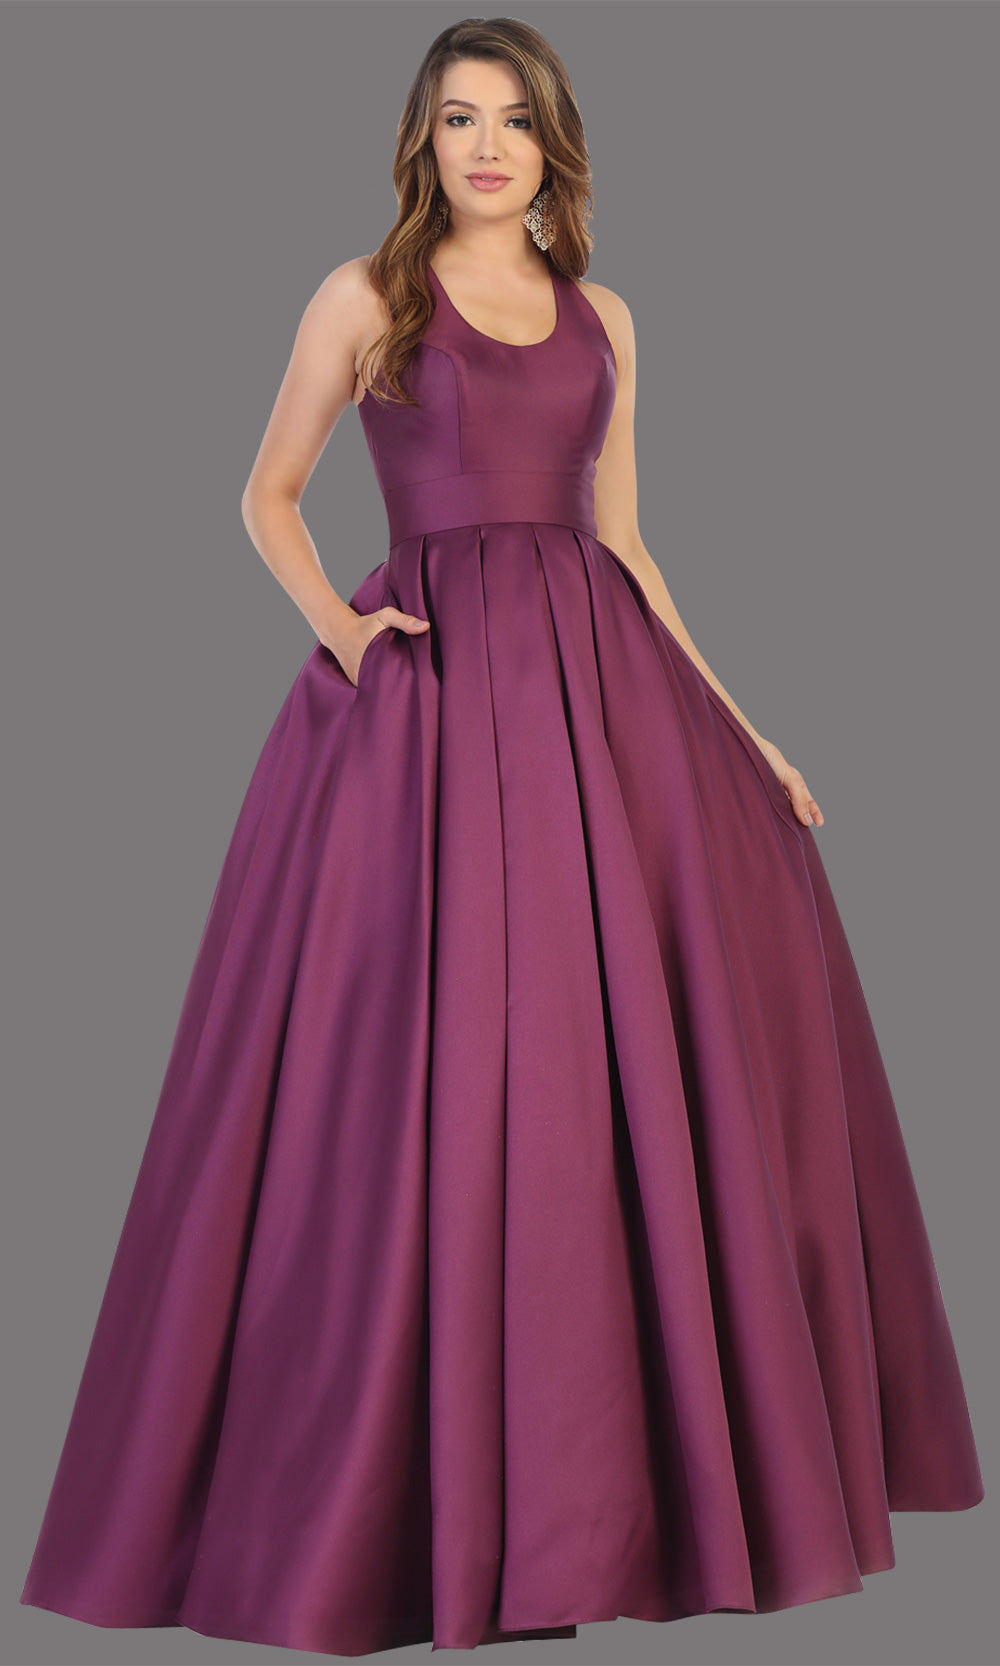 Mayqueen MQ1721-long eggplant semi ballgown w/open back. This simple purple dress is perfect for prom, engagement/e-shoot, wedding reception dress, bridesmaid dresses, formal wedding guest dress, sweet 16 dress, debut. Plus sizes avail